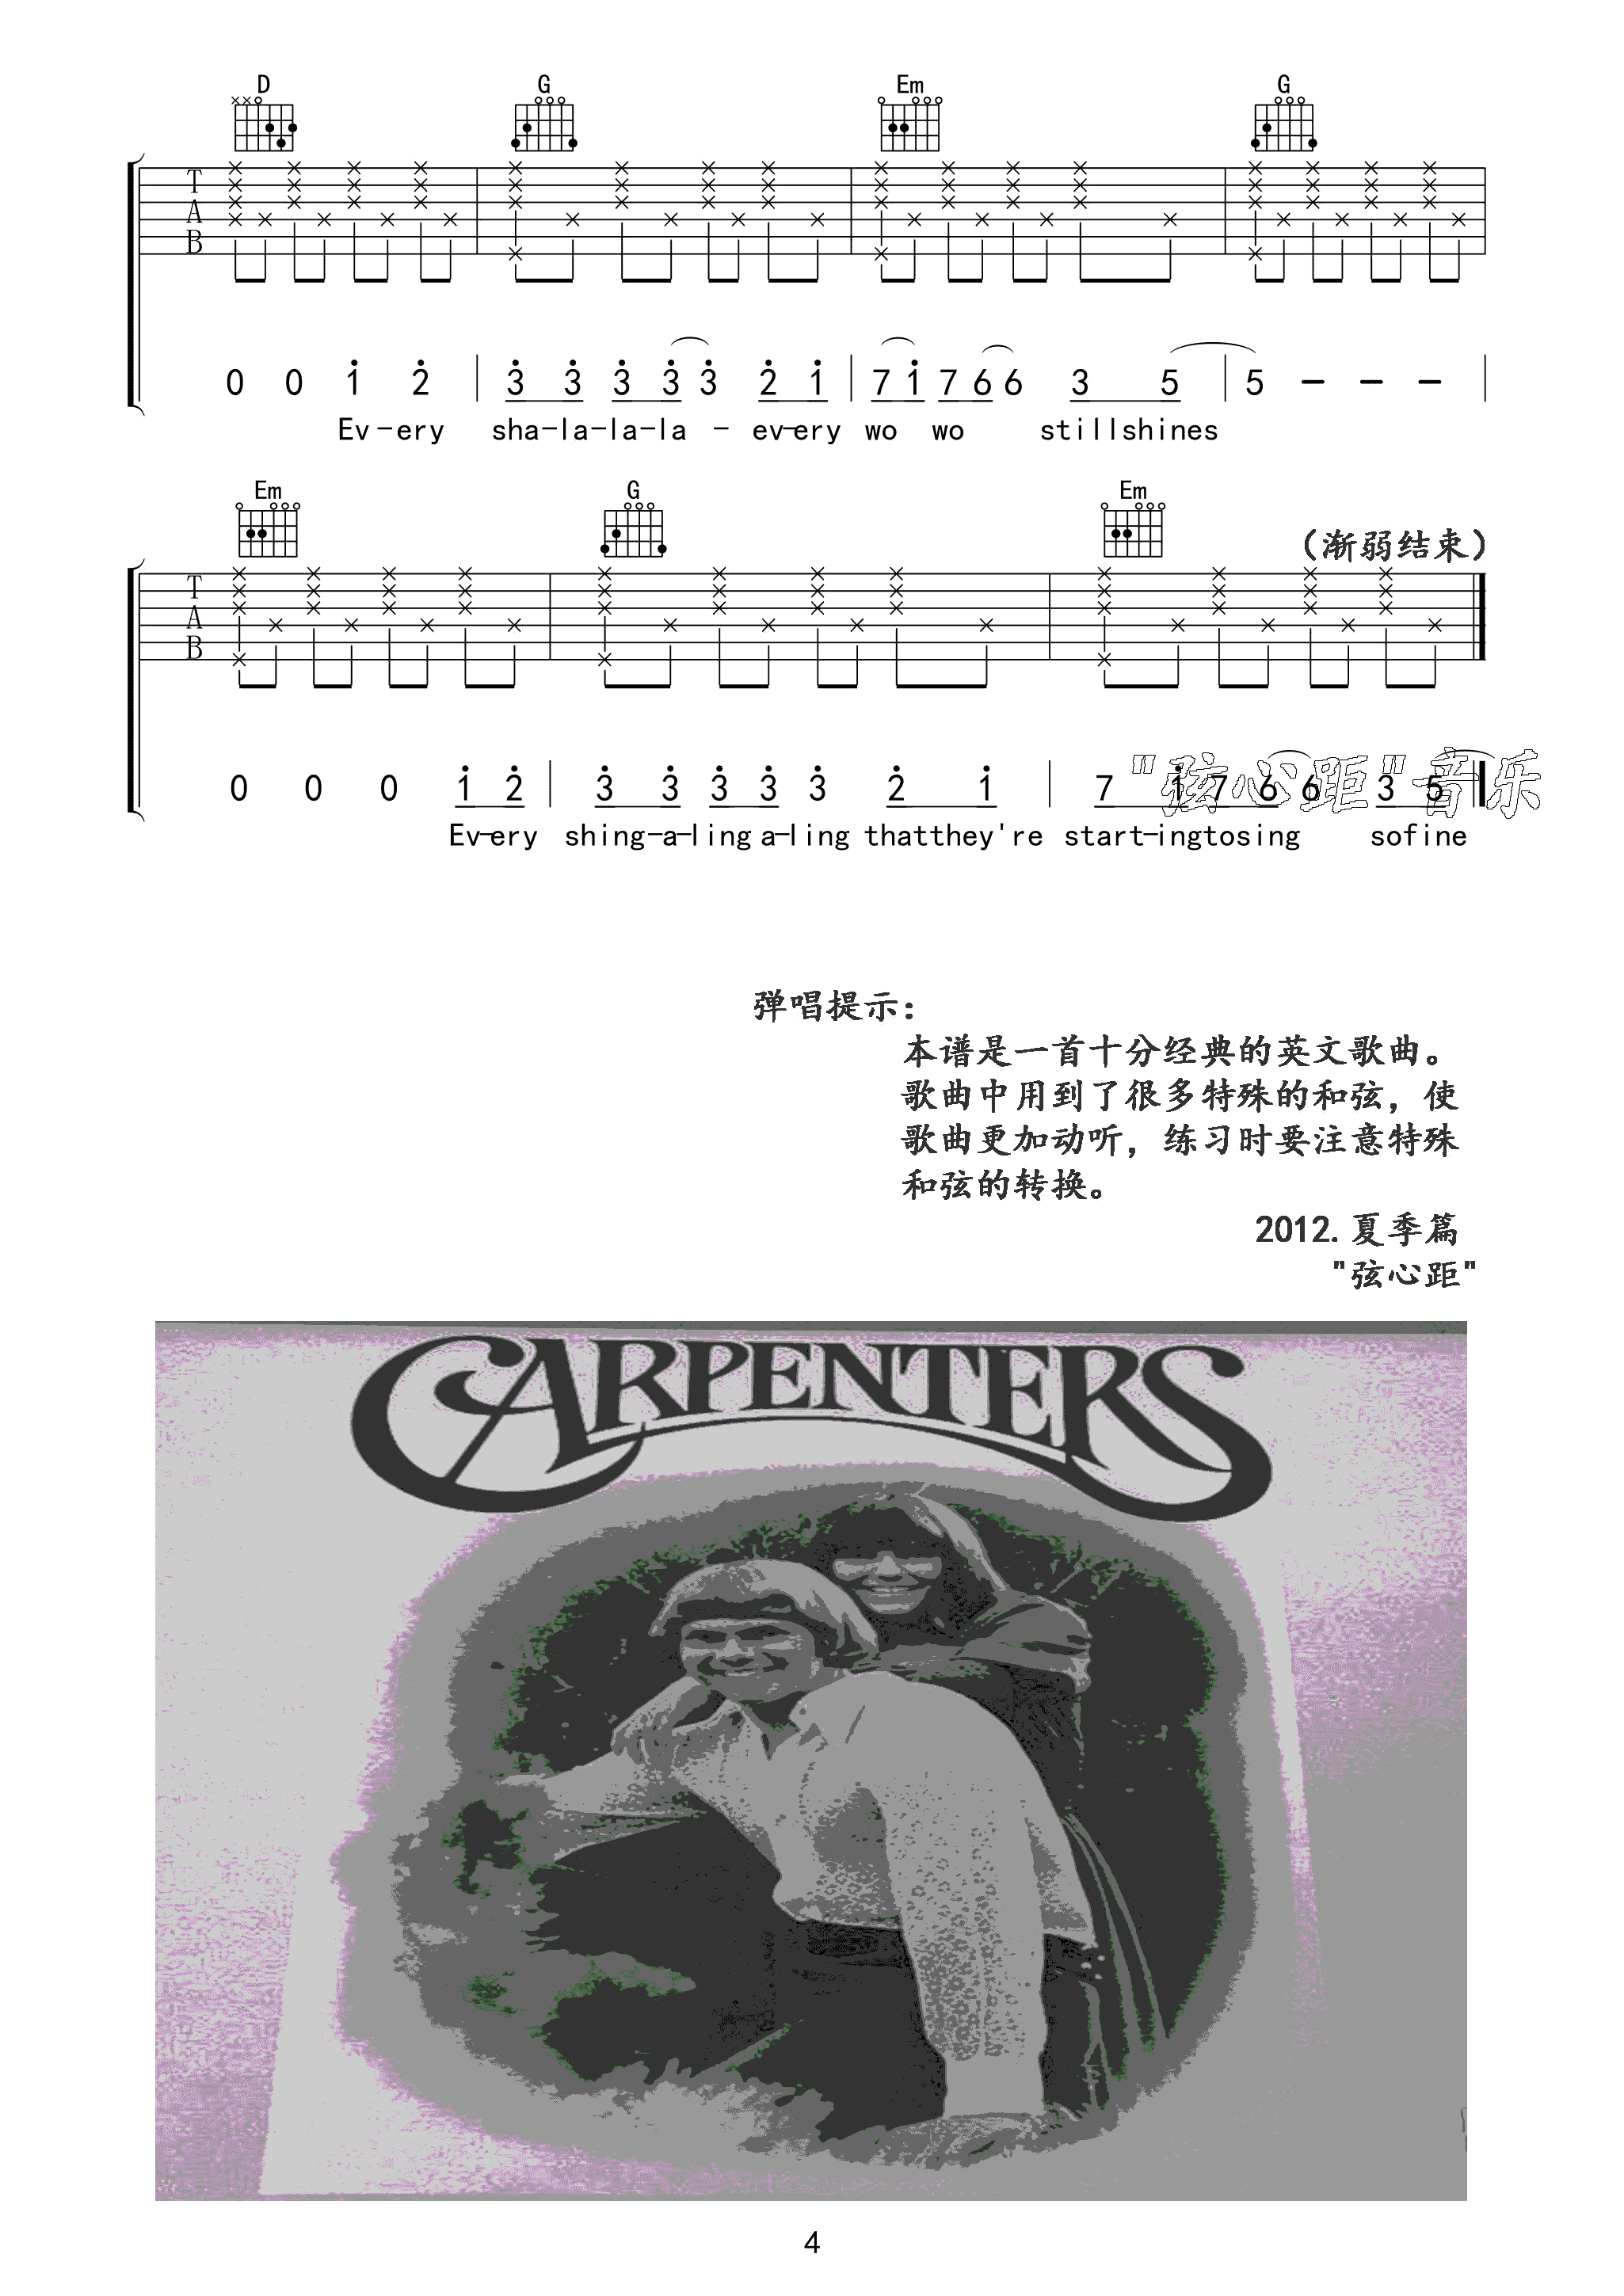 Carpenters Yesterday Once More昨日重现吉他谱 弦心距G调版 吉他谱